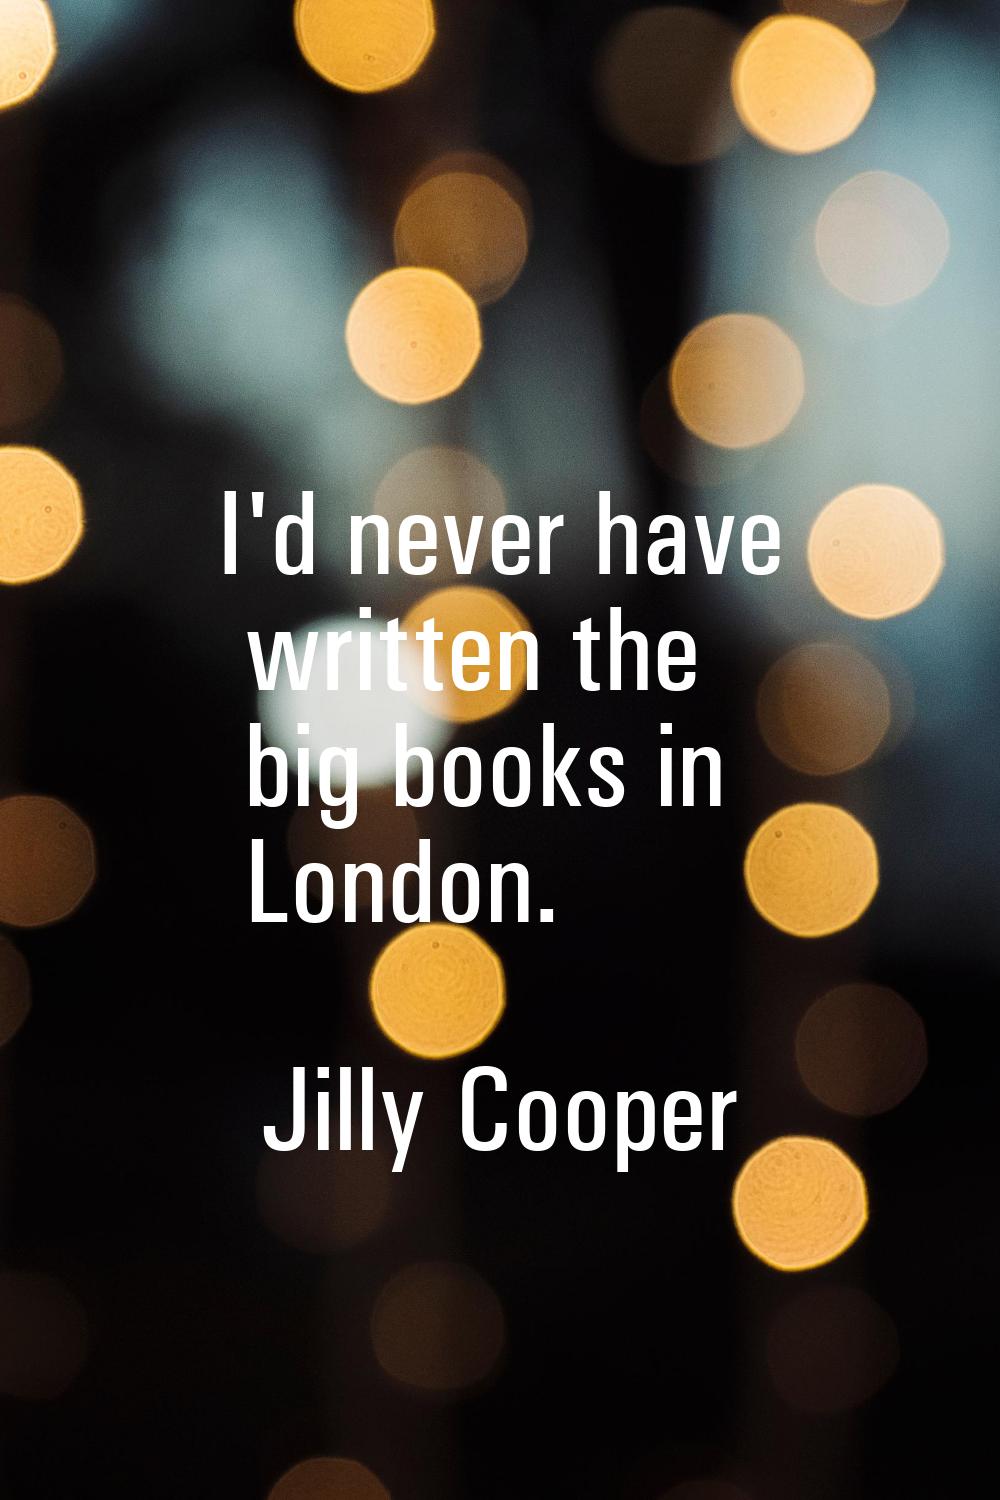 I'd never have written the big books in London.